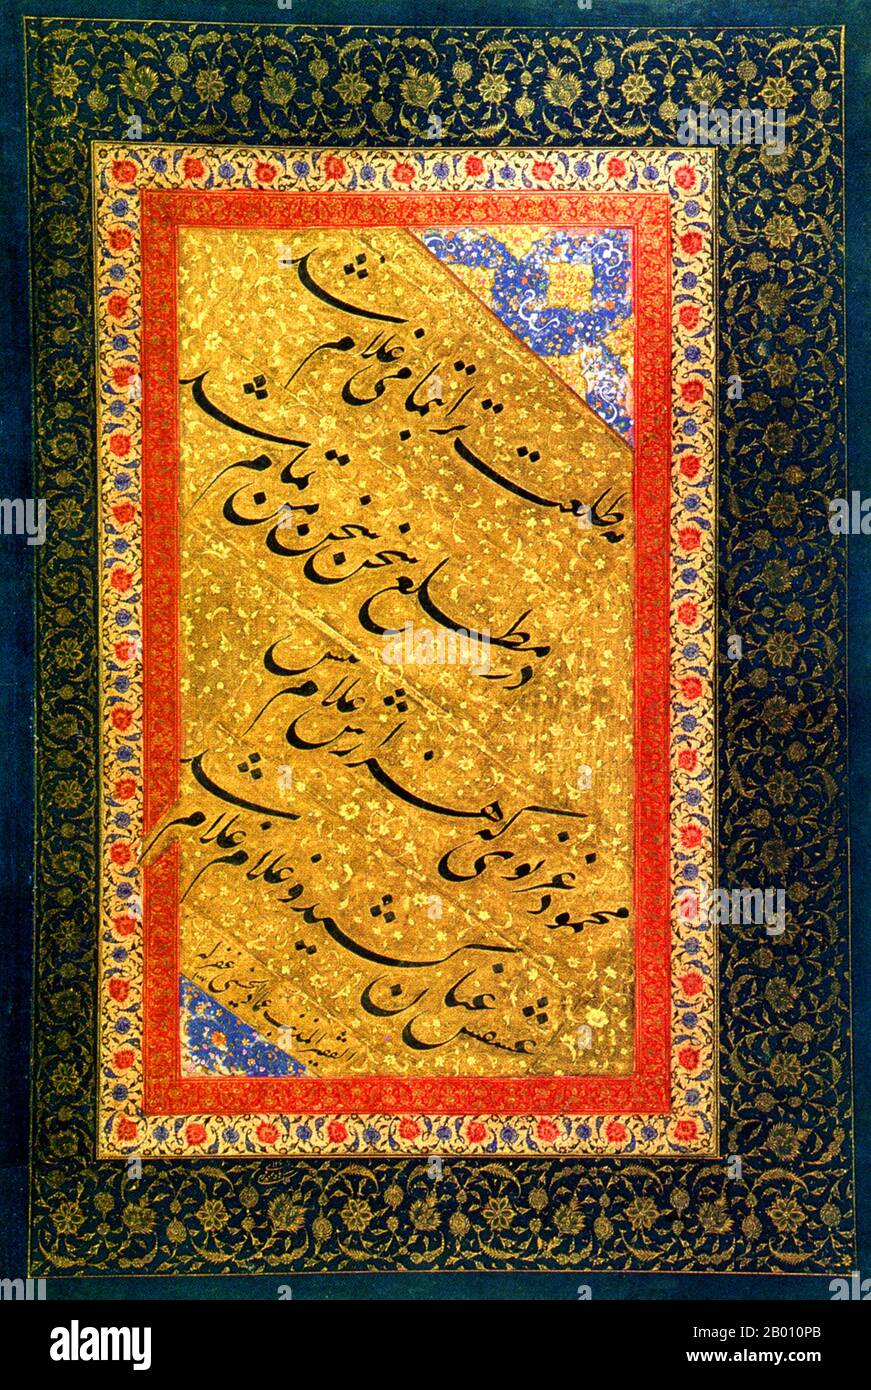 Iran: A quatrain, or poem, from a Persian Muraqqa dating from 1598-1599.  A Muraqqa is an album of artwork which predominated in the 16th century in the Safavid, Mughal and Ottoman empires. The Muraqqa album consists of compilations of various fine arts, including Islamic calligraphy, Ottoman miniatures, paintings, drawings, ghazals and Persian poetry. The pages in this type of illuminated manuscript usually have decorated margins. The ruling elite of this time period were fond of collecting and compiling these types of albums, sometimes making alterations to existing Muraqqas. Stock Photo